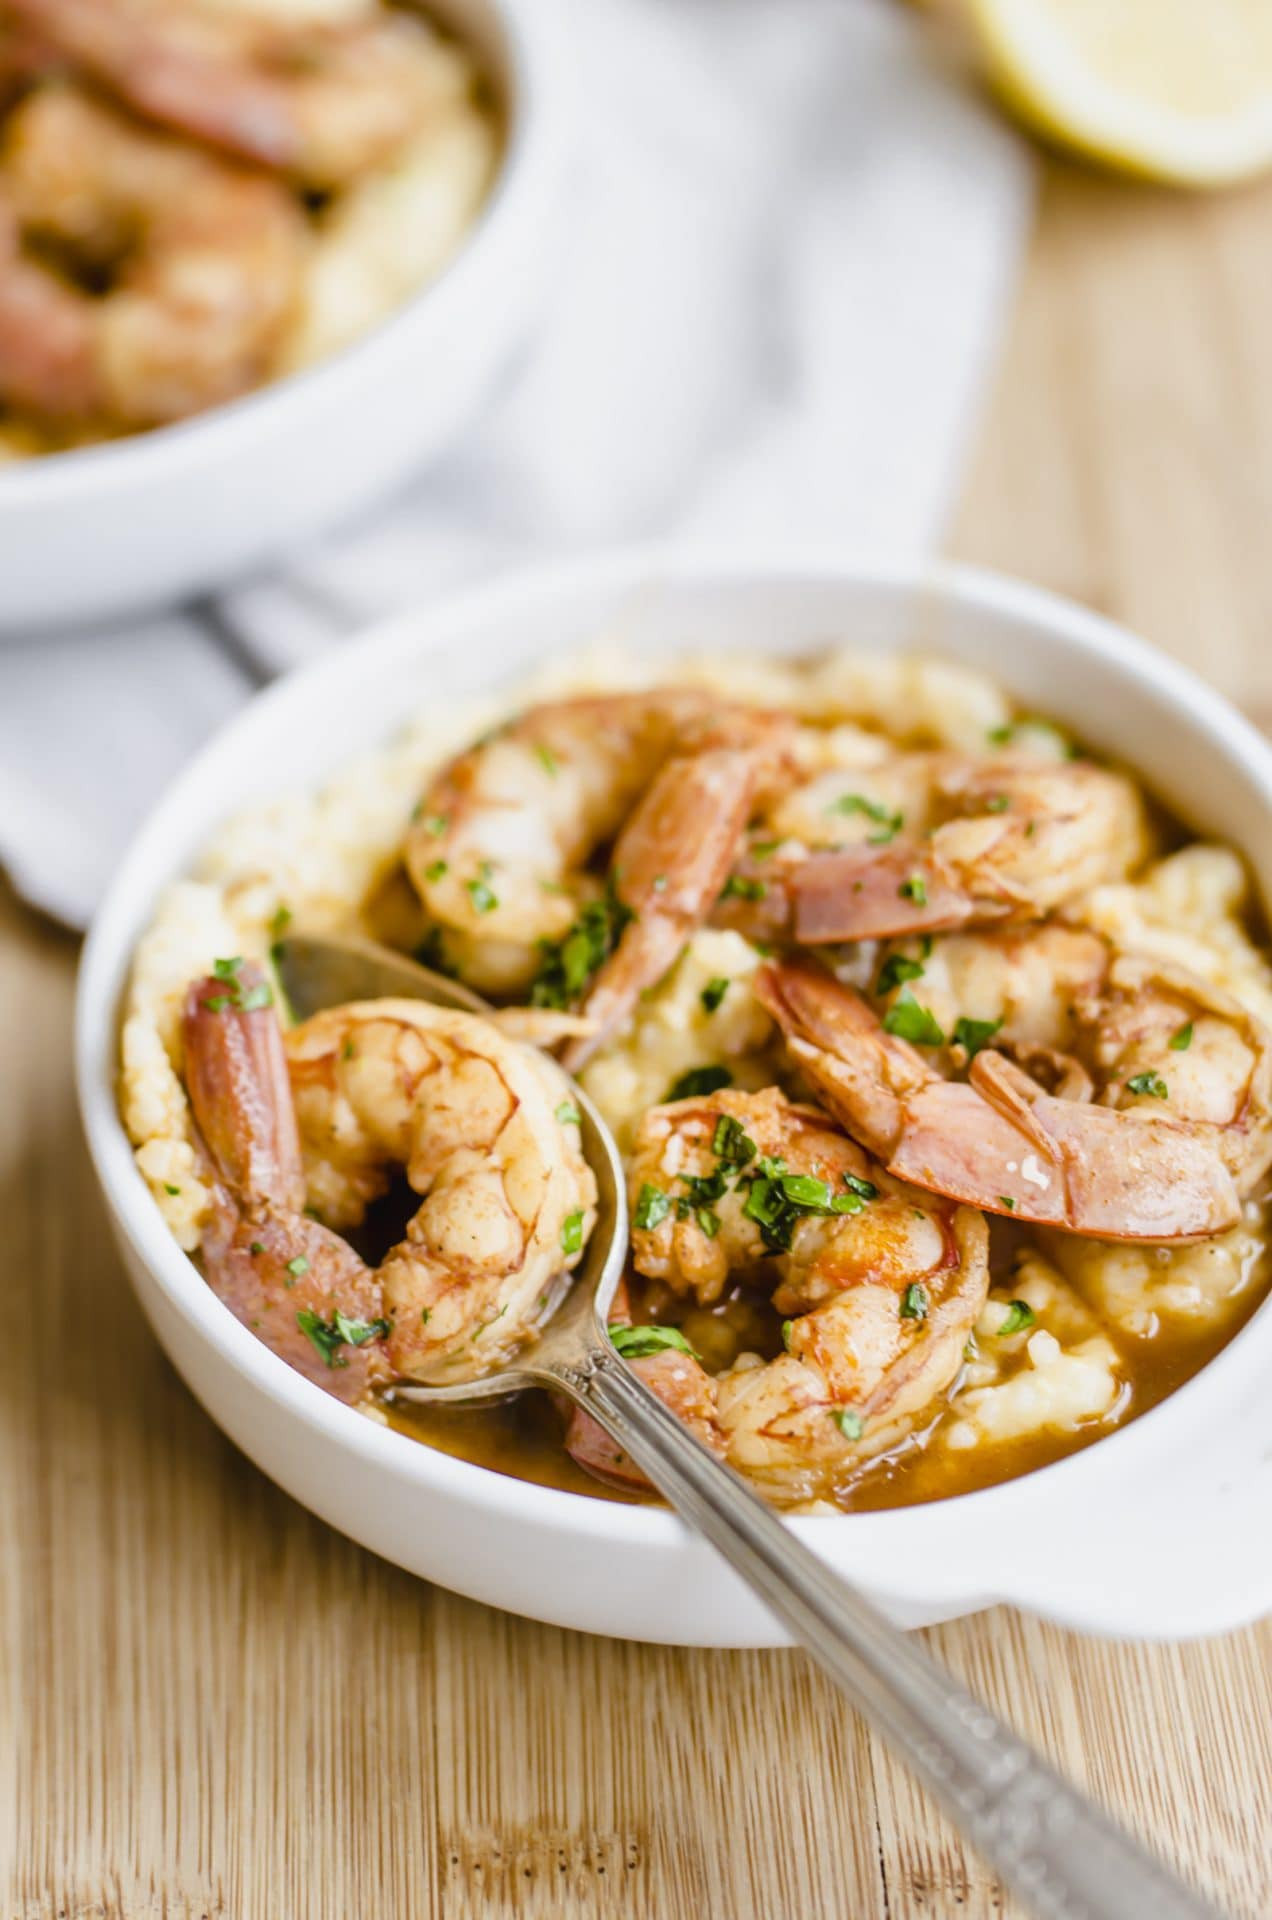 New Orleans Bbq Shrimp And Grits
 New Orleans Style Barbecue Shrimp with Grits